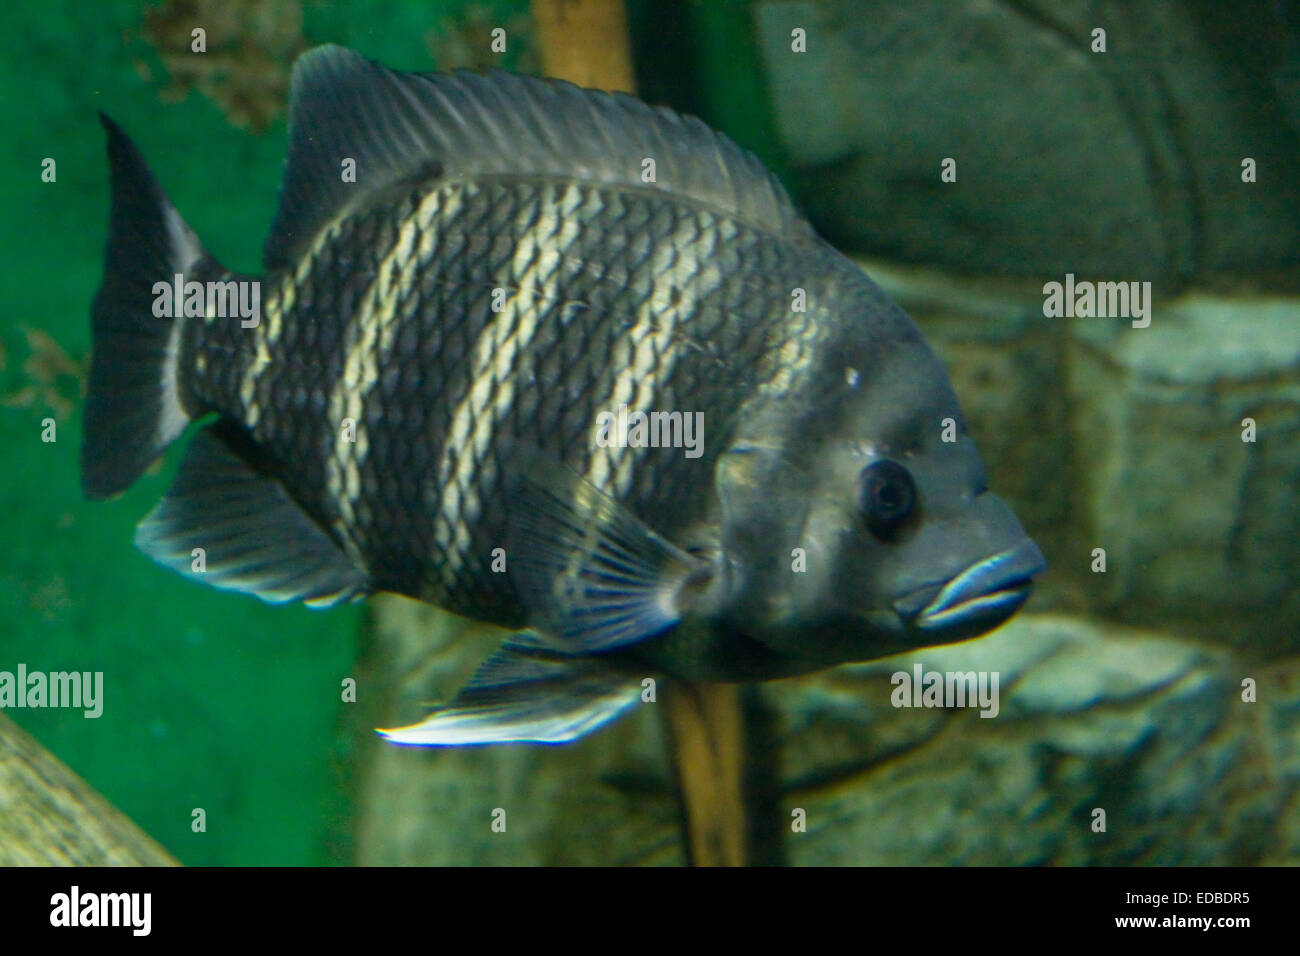 Tropical fish Tilapia buttuctikoferi, lives in rivers of Western Africa. Stock Photo